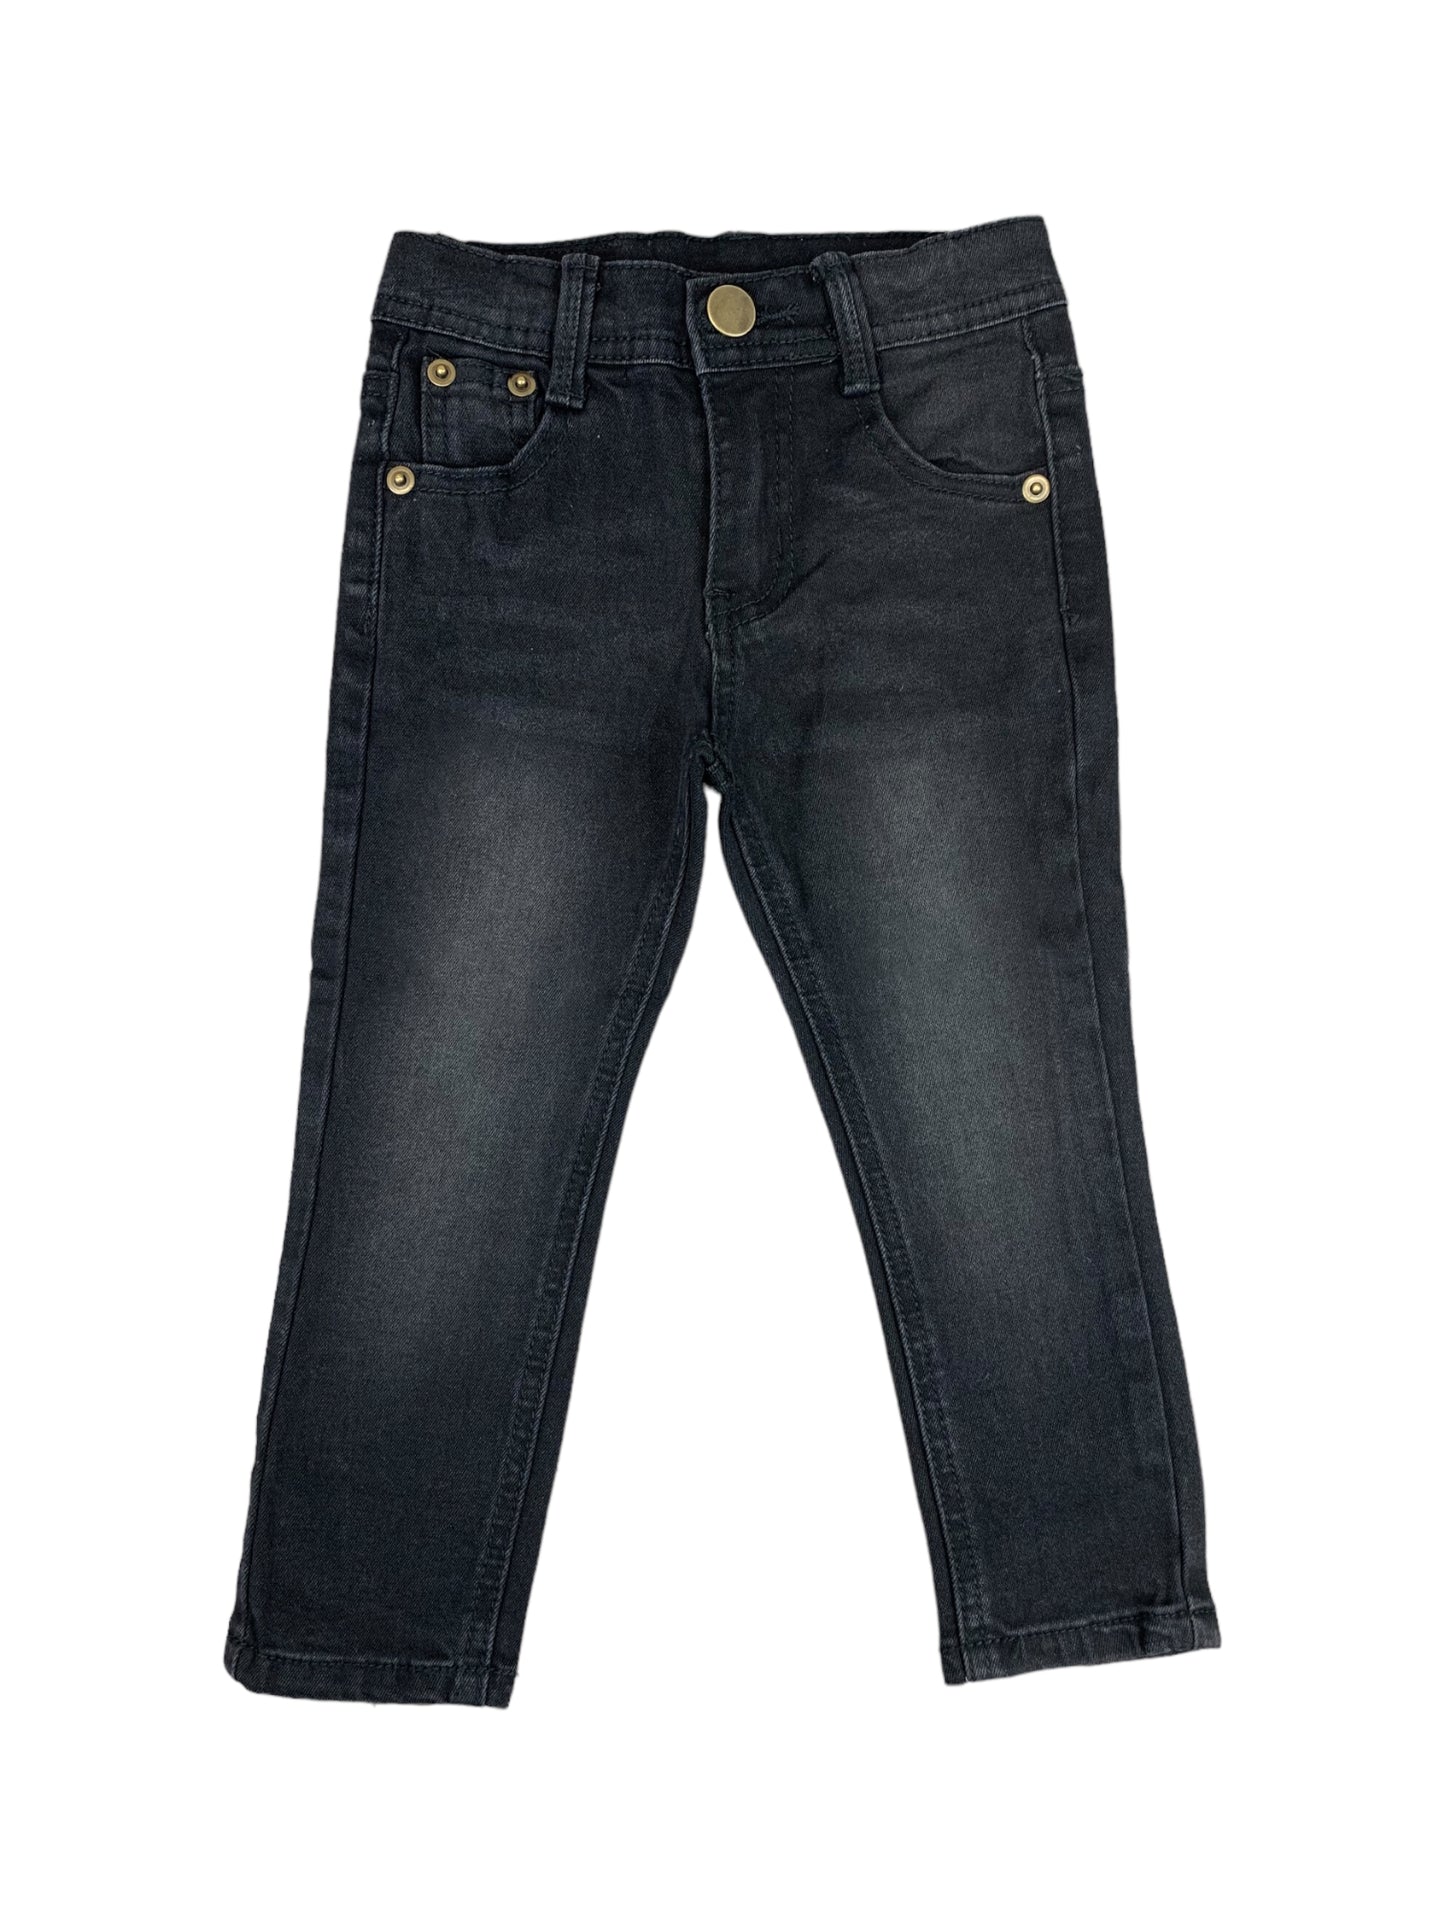 Black jeans Northcoast for boys 2 to 7 years